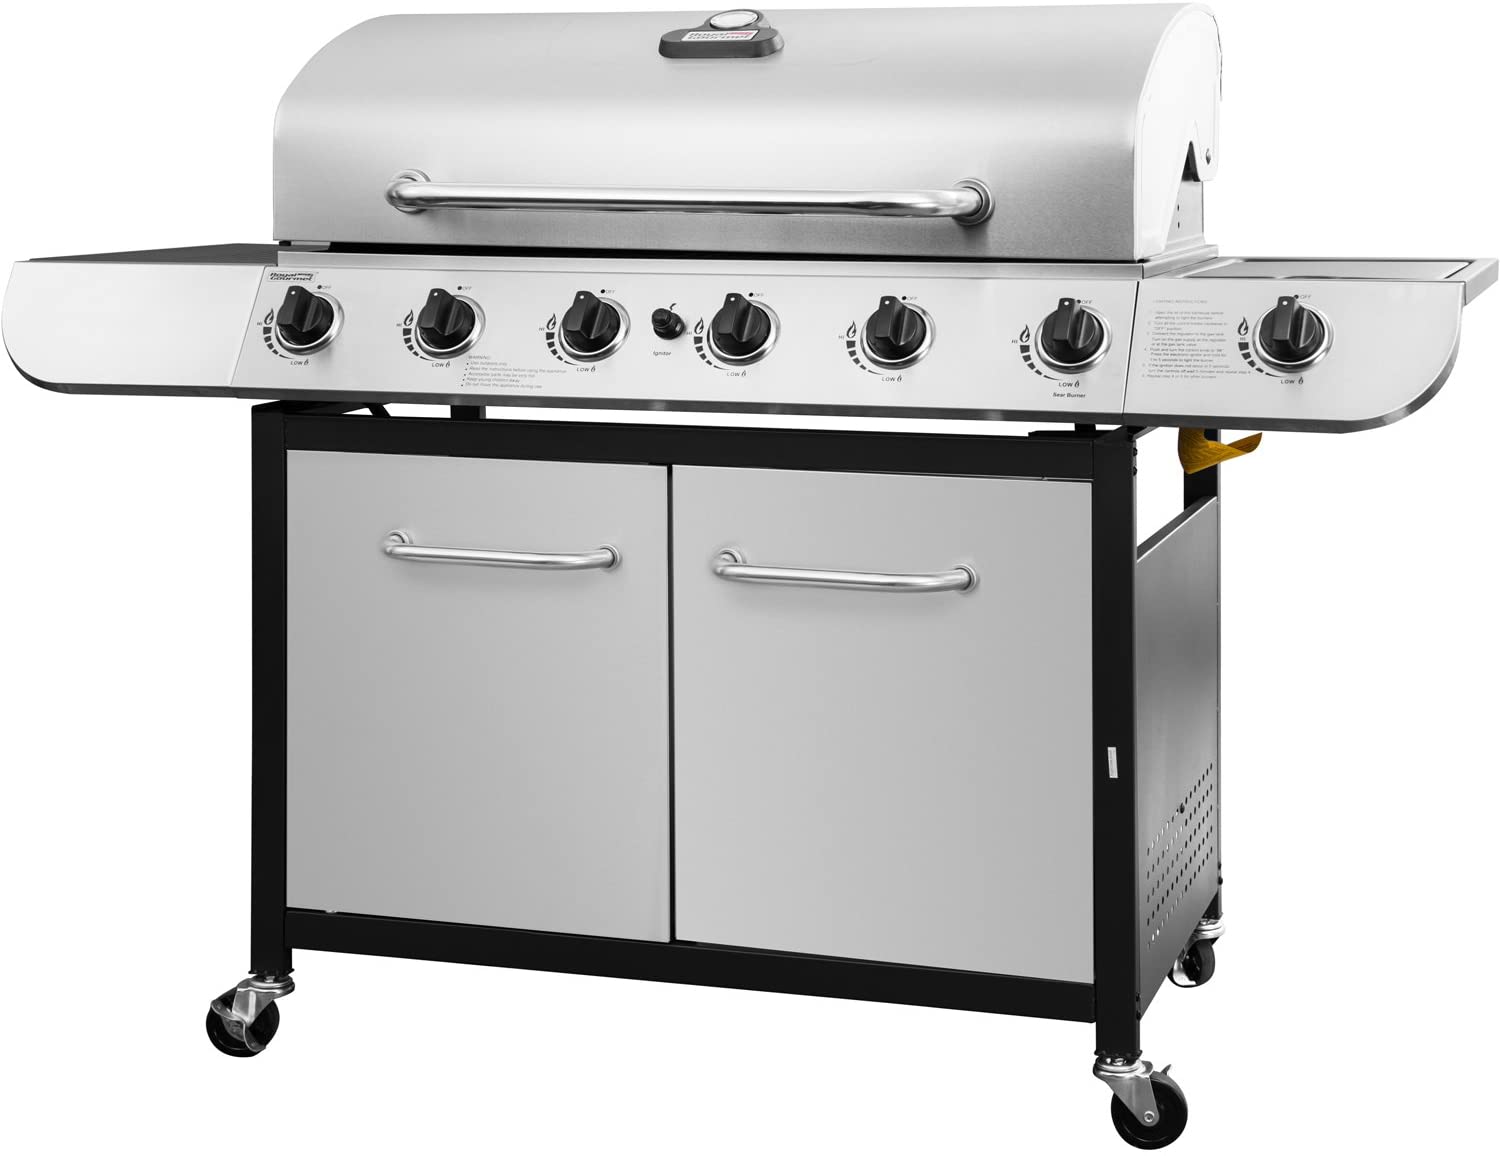 Royal Gourmet SG6002 Cabinet Propane Gas Grill